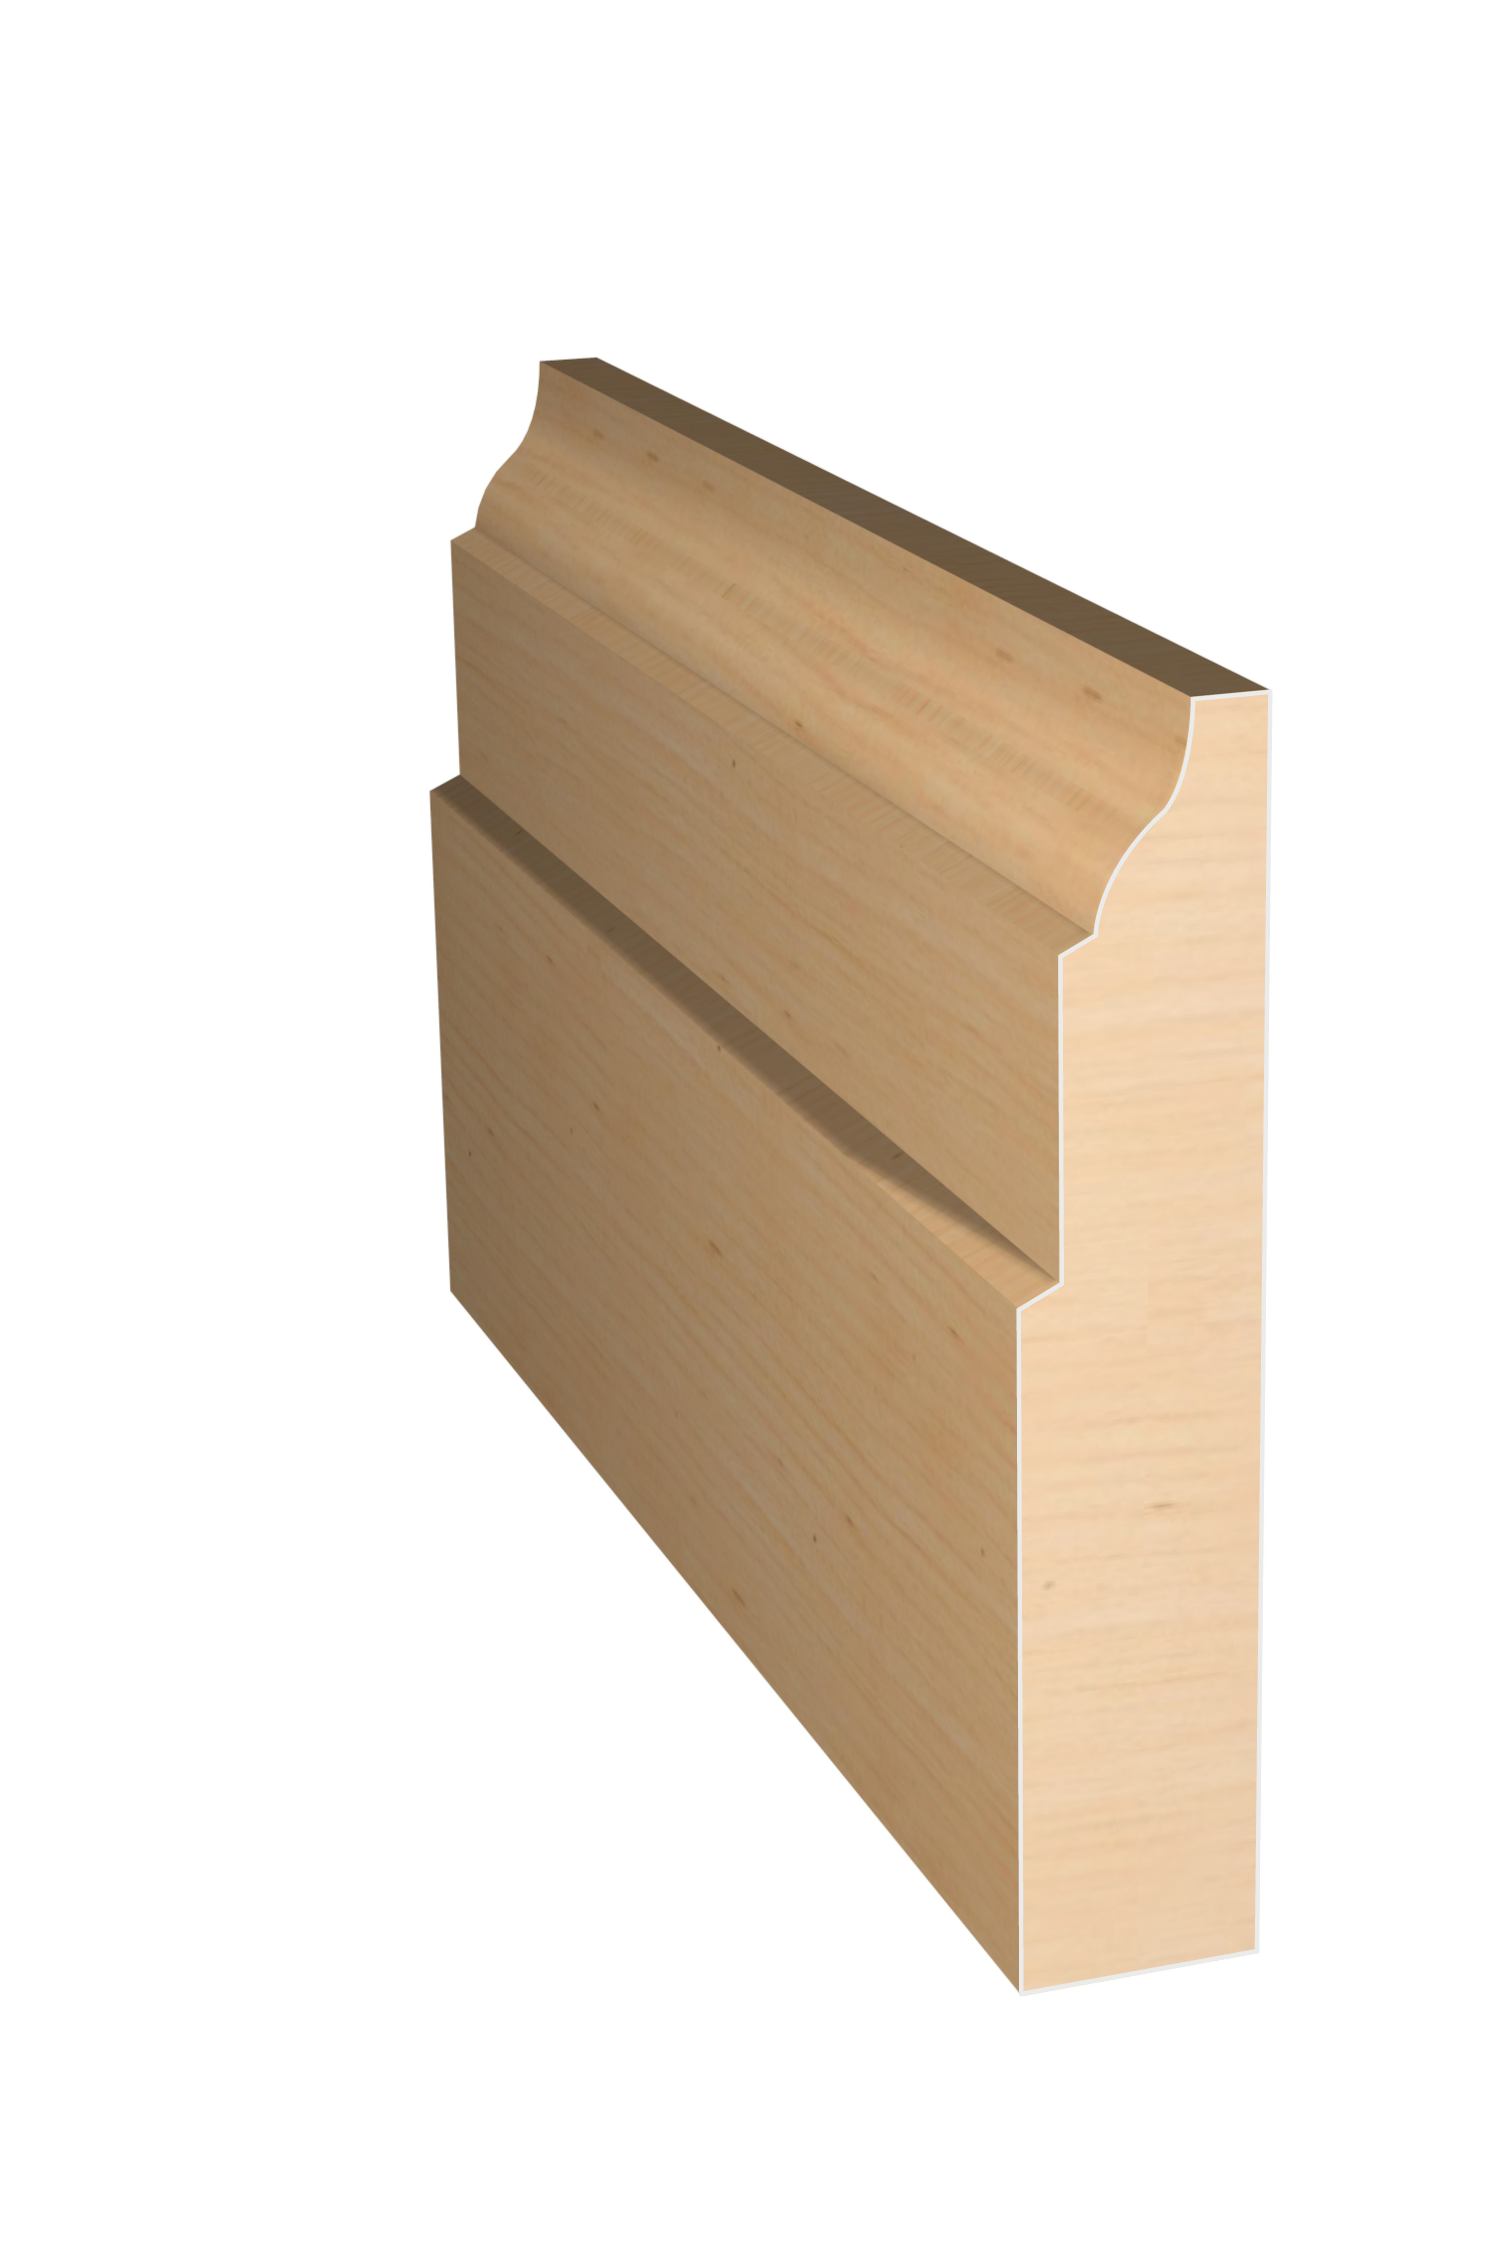 Three dimensional rendering of custom casing wood molding CAPL31236 made by Public Lumber Company in Detroit.